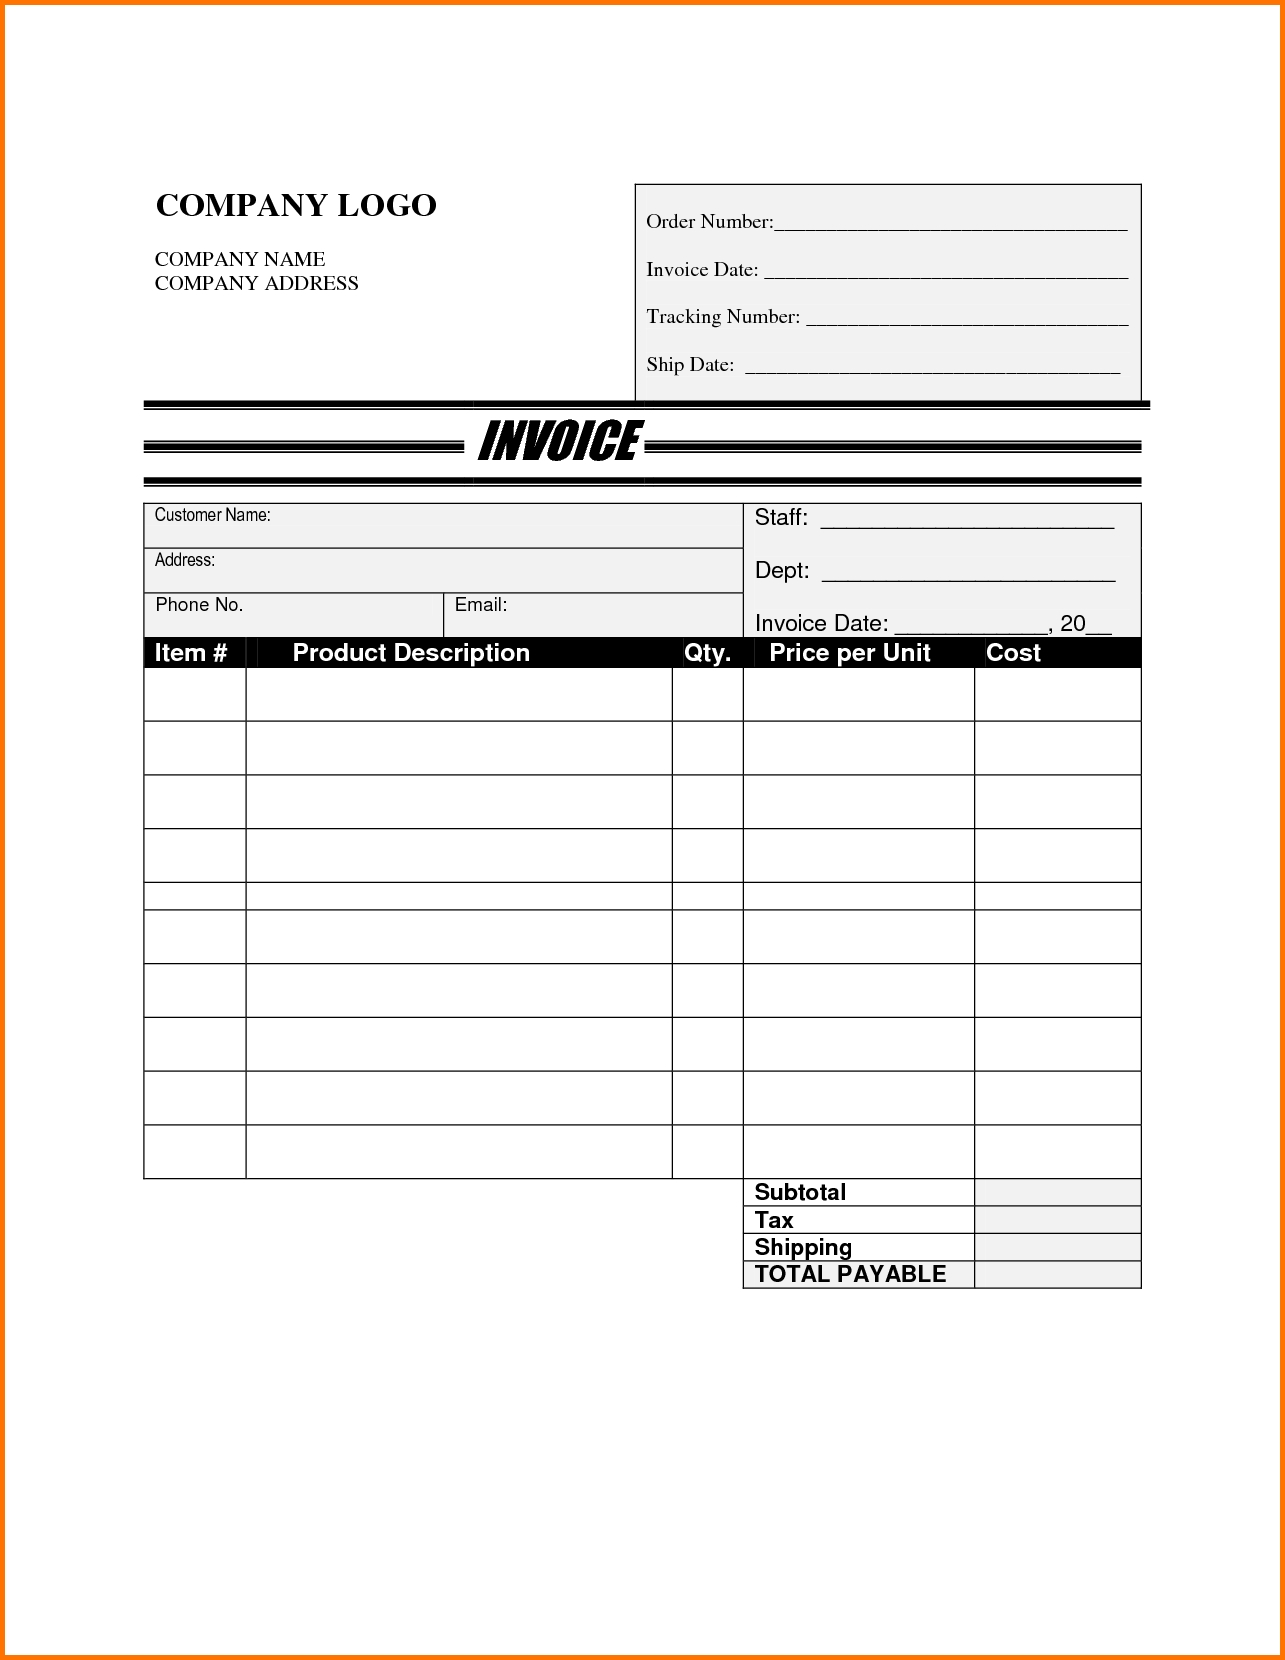 company invoice template 5 expense report moving companies free expense invoice template